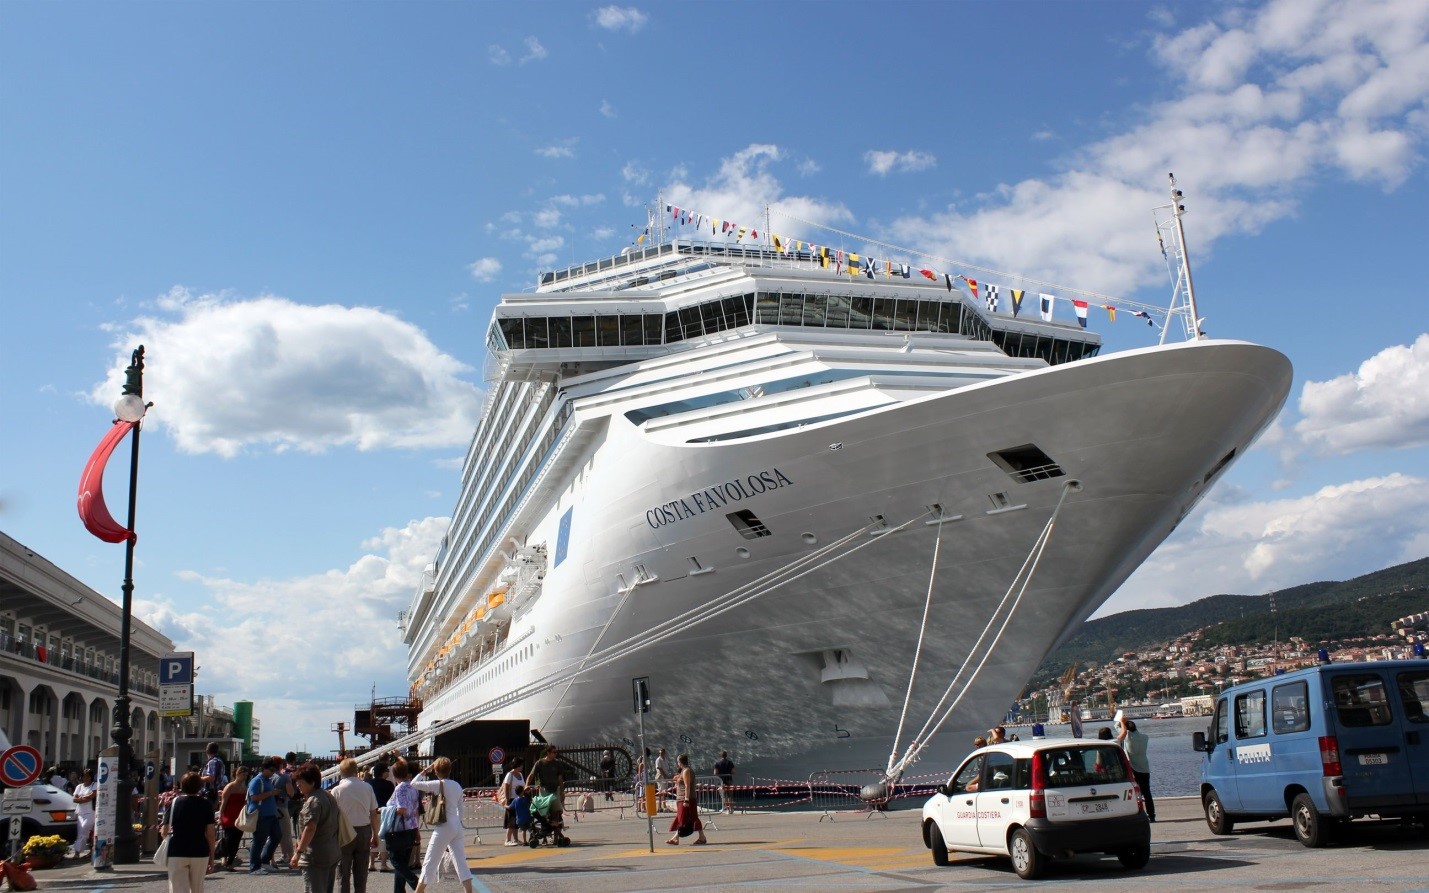 5 Tips for Shore Excursion Safety